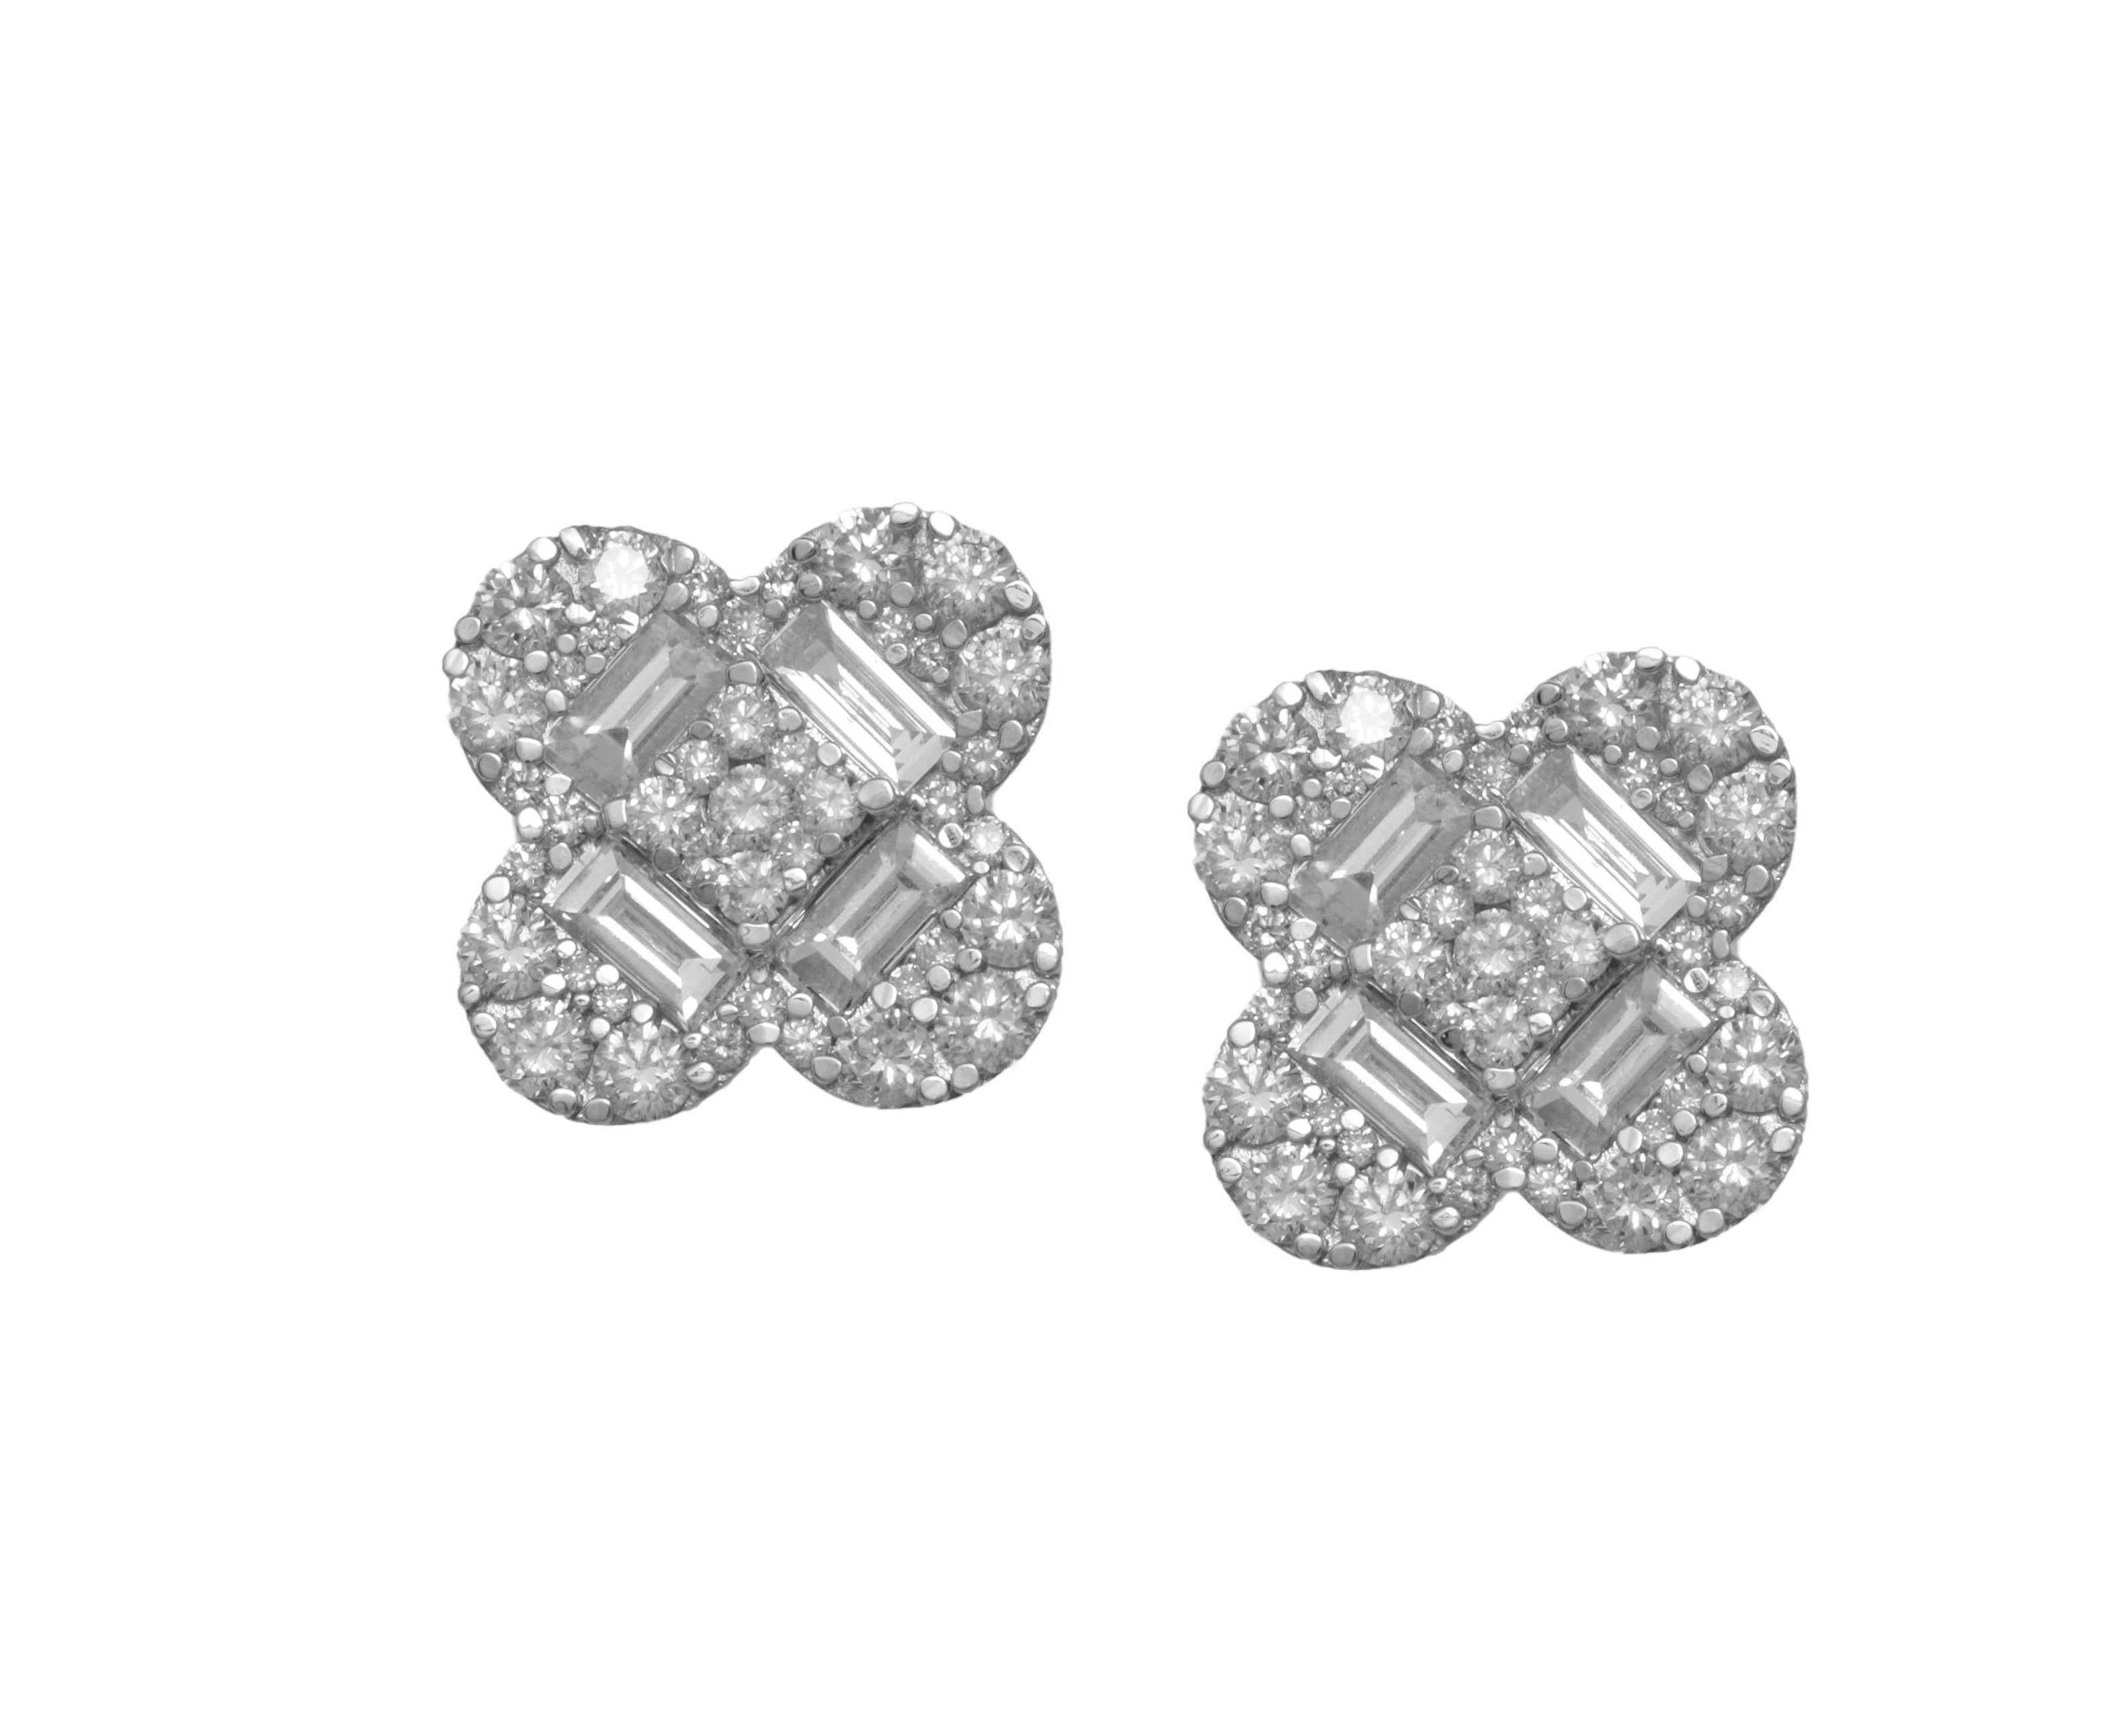 14K White Gold Diamond Earrings featuring 1.30 Carat T.W. of Natural Diamonds

Underline your look with this sharp 14K White Gold Diamond Earrings. High quality Diamonds. This Earrings will underline your exquisite look for any occasion.

. is a